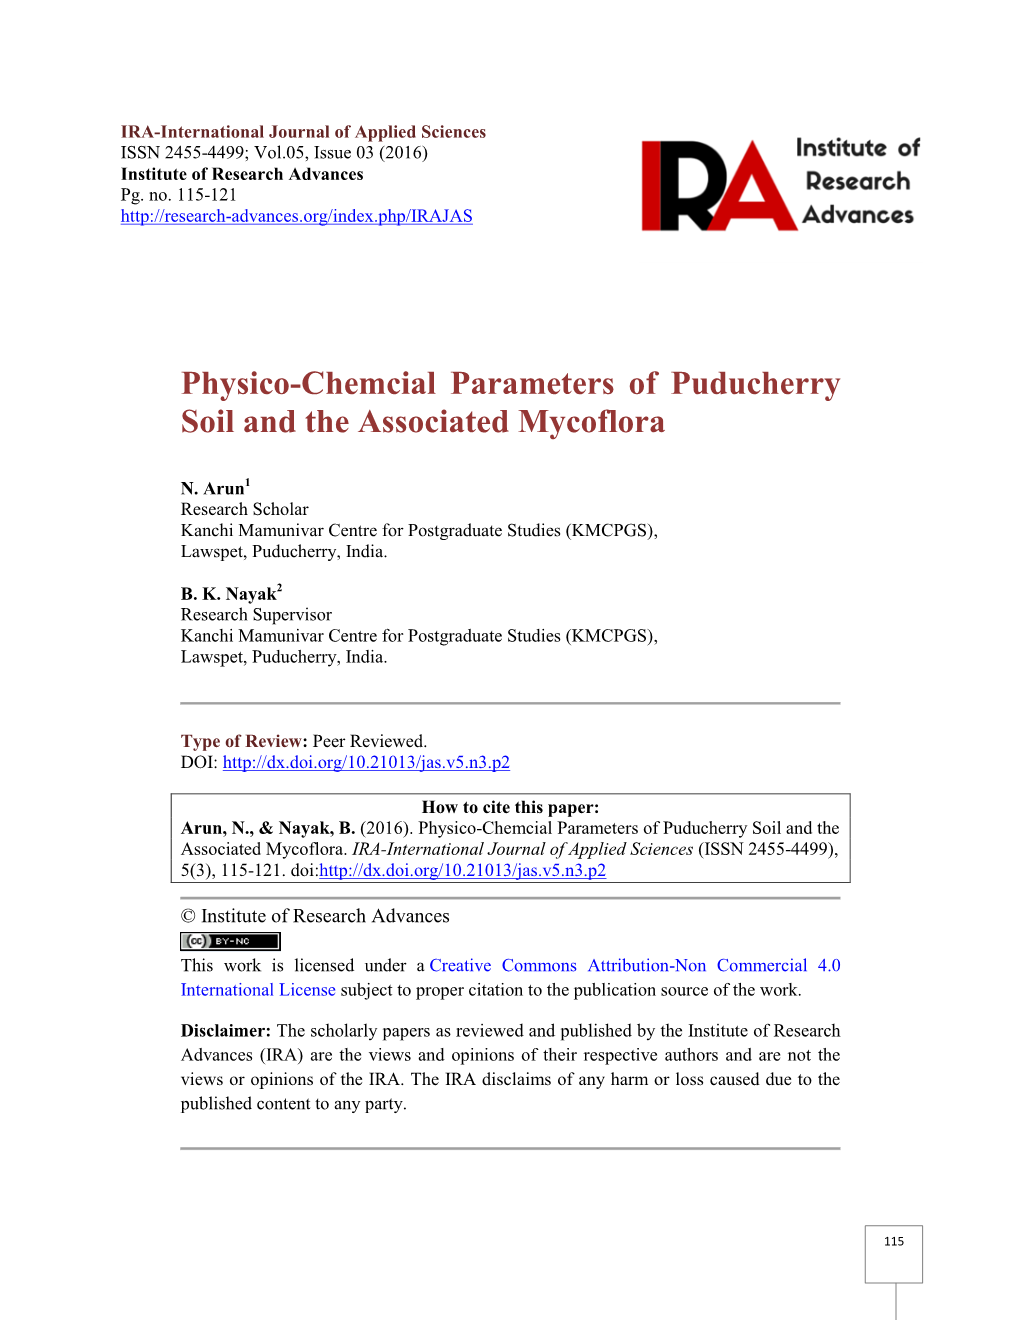 Physico-Chemcial Parameters of Puducherry Soil and the Associated Mycoflora